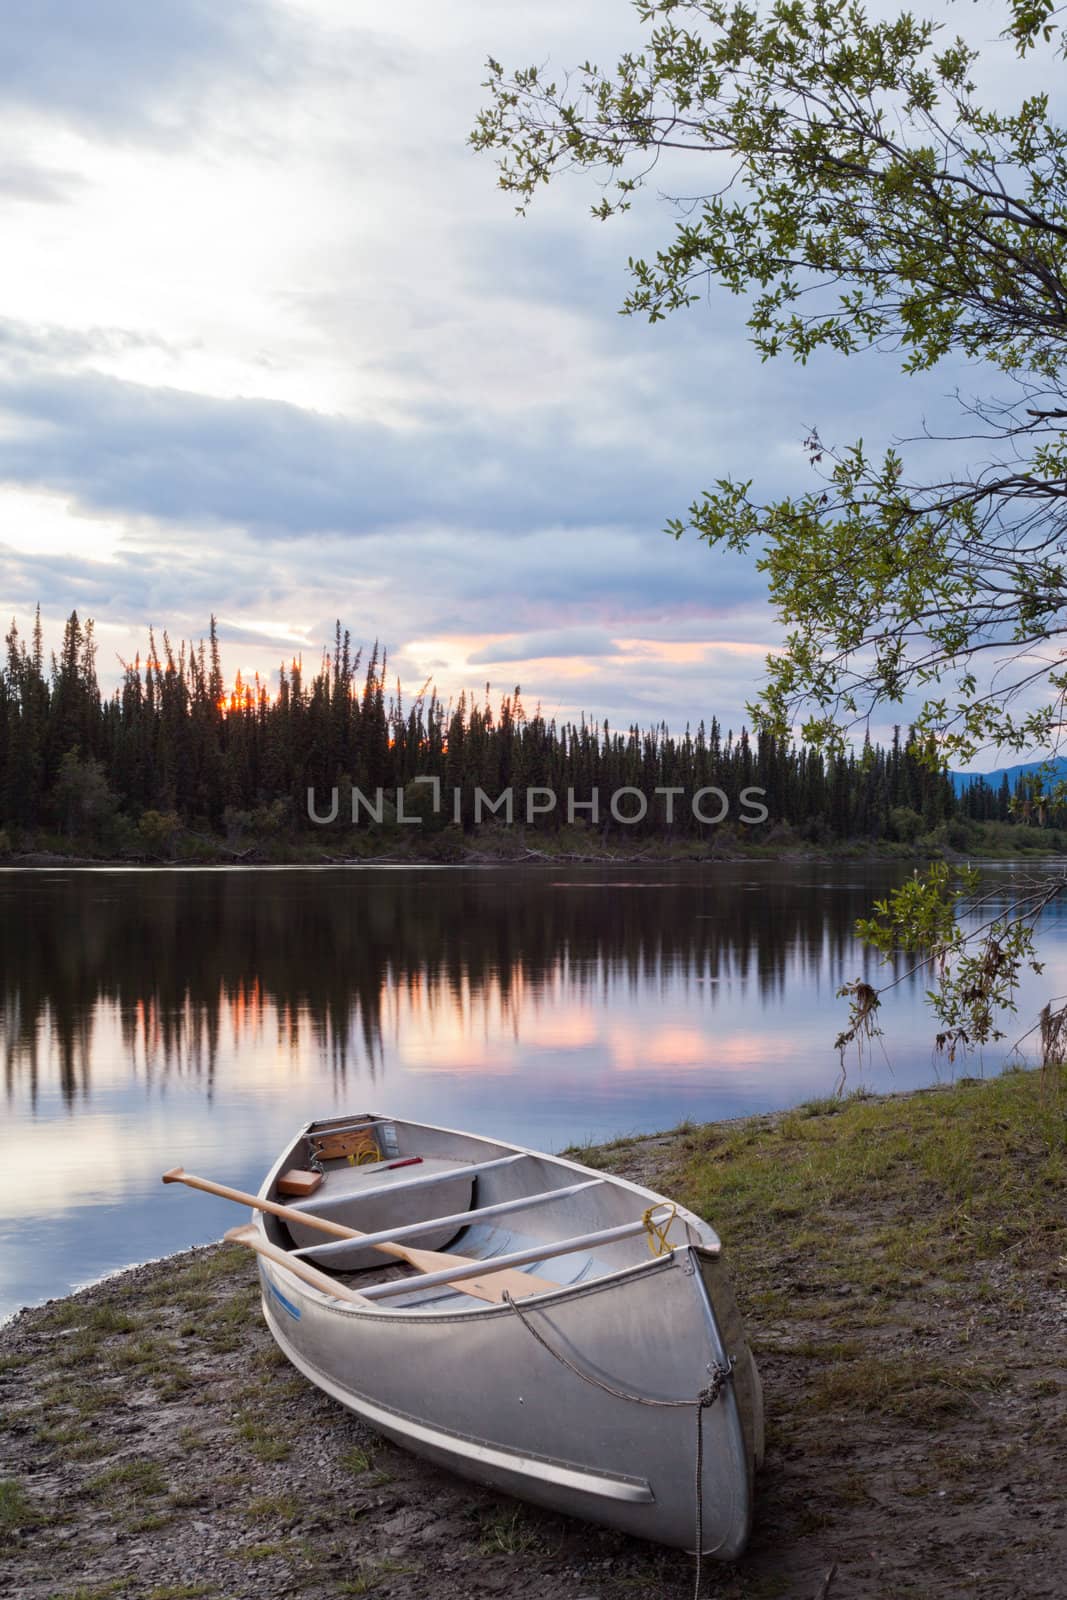 Canoe and paddles beached on shore of beautiful Teslin River in the remote wilderness of Yukon Territory, Canada, the river surface reflecting delicate sunset colors